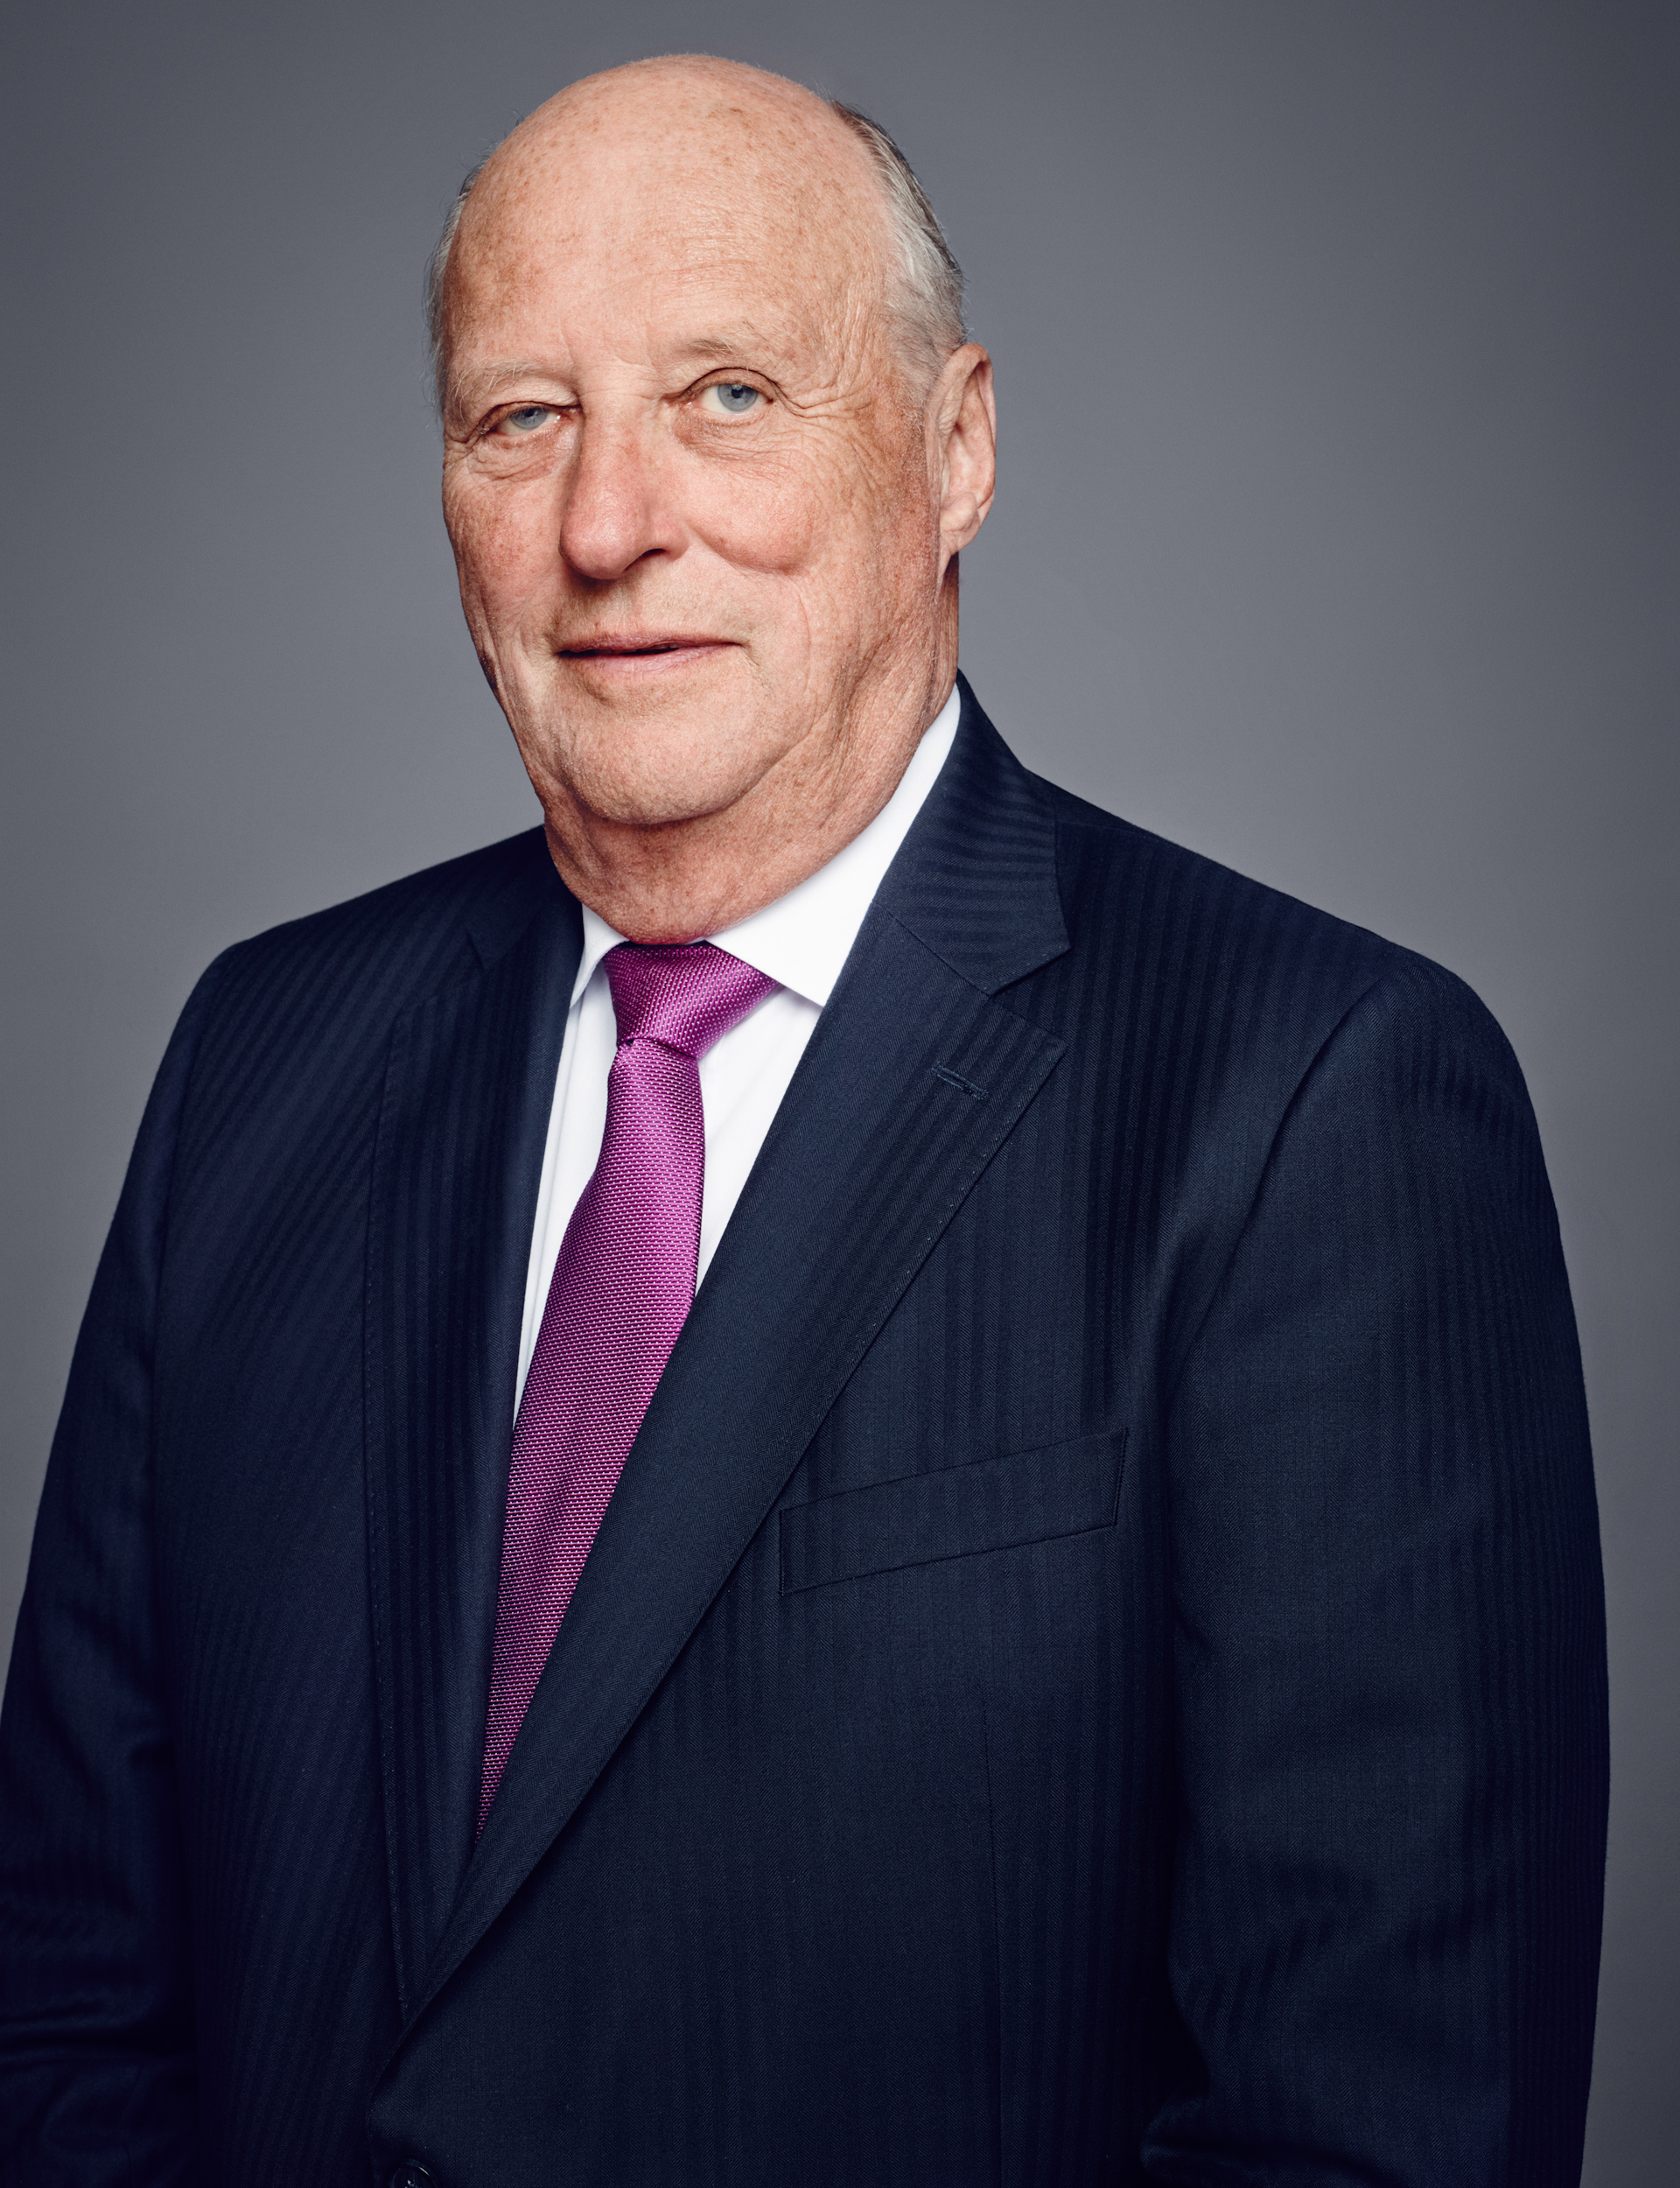 Bad news about King Harald